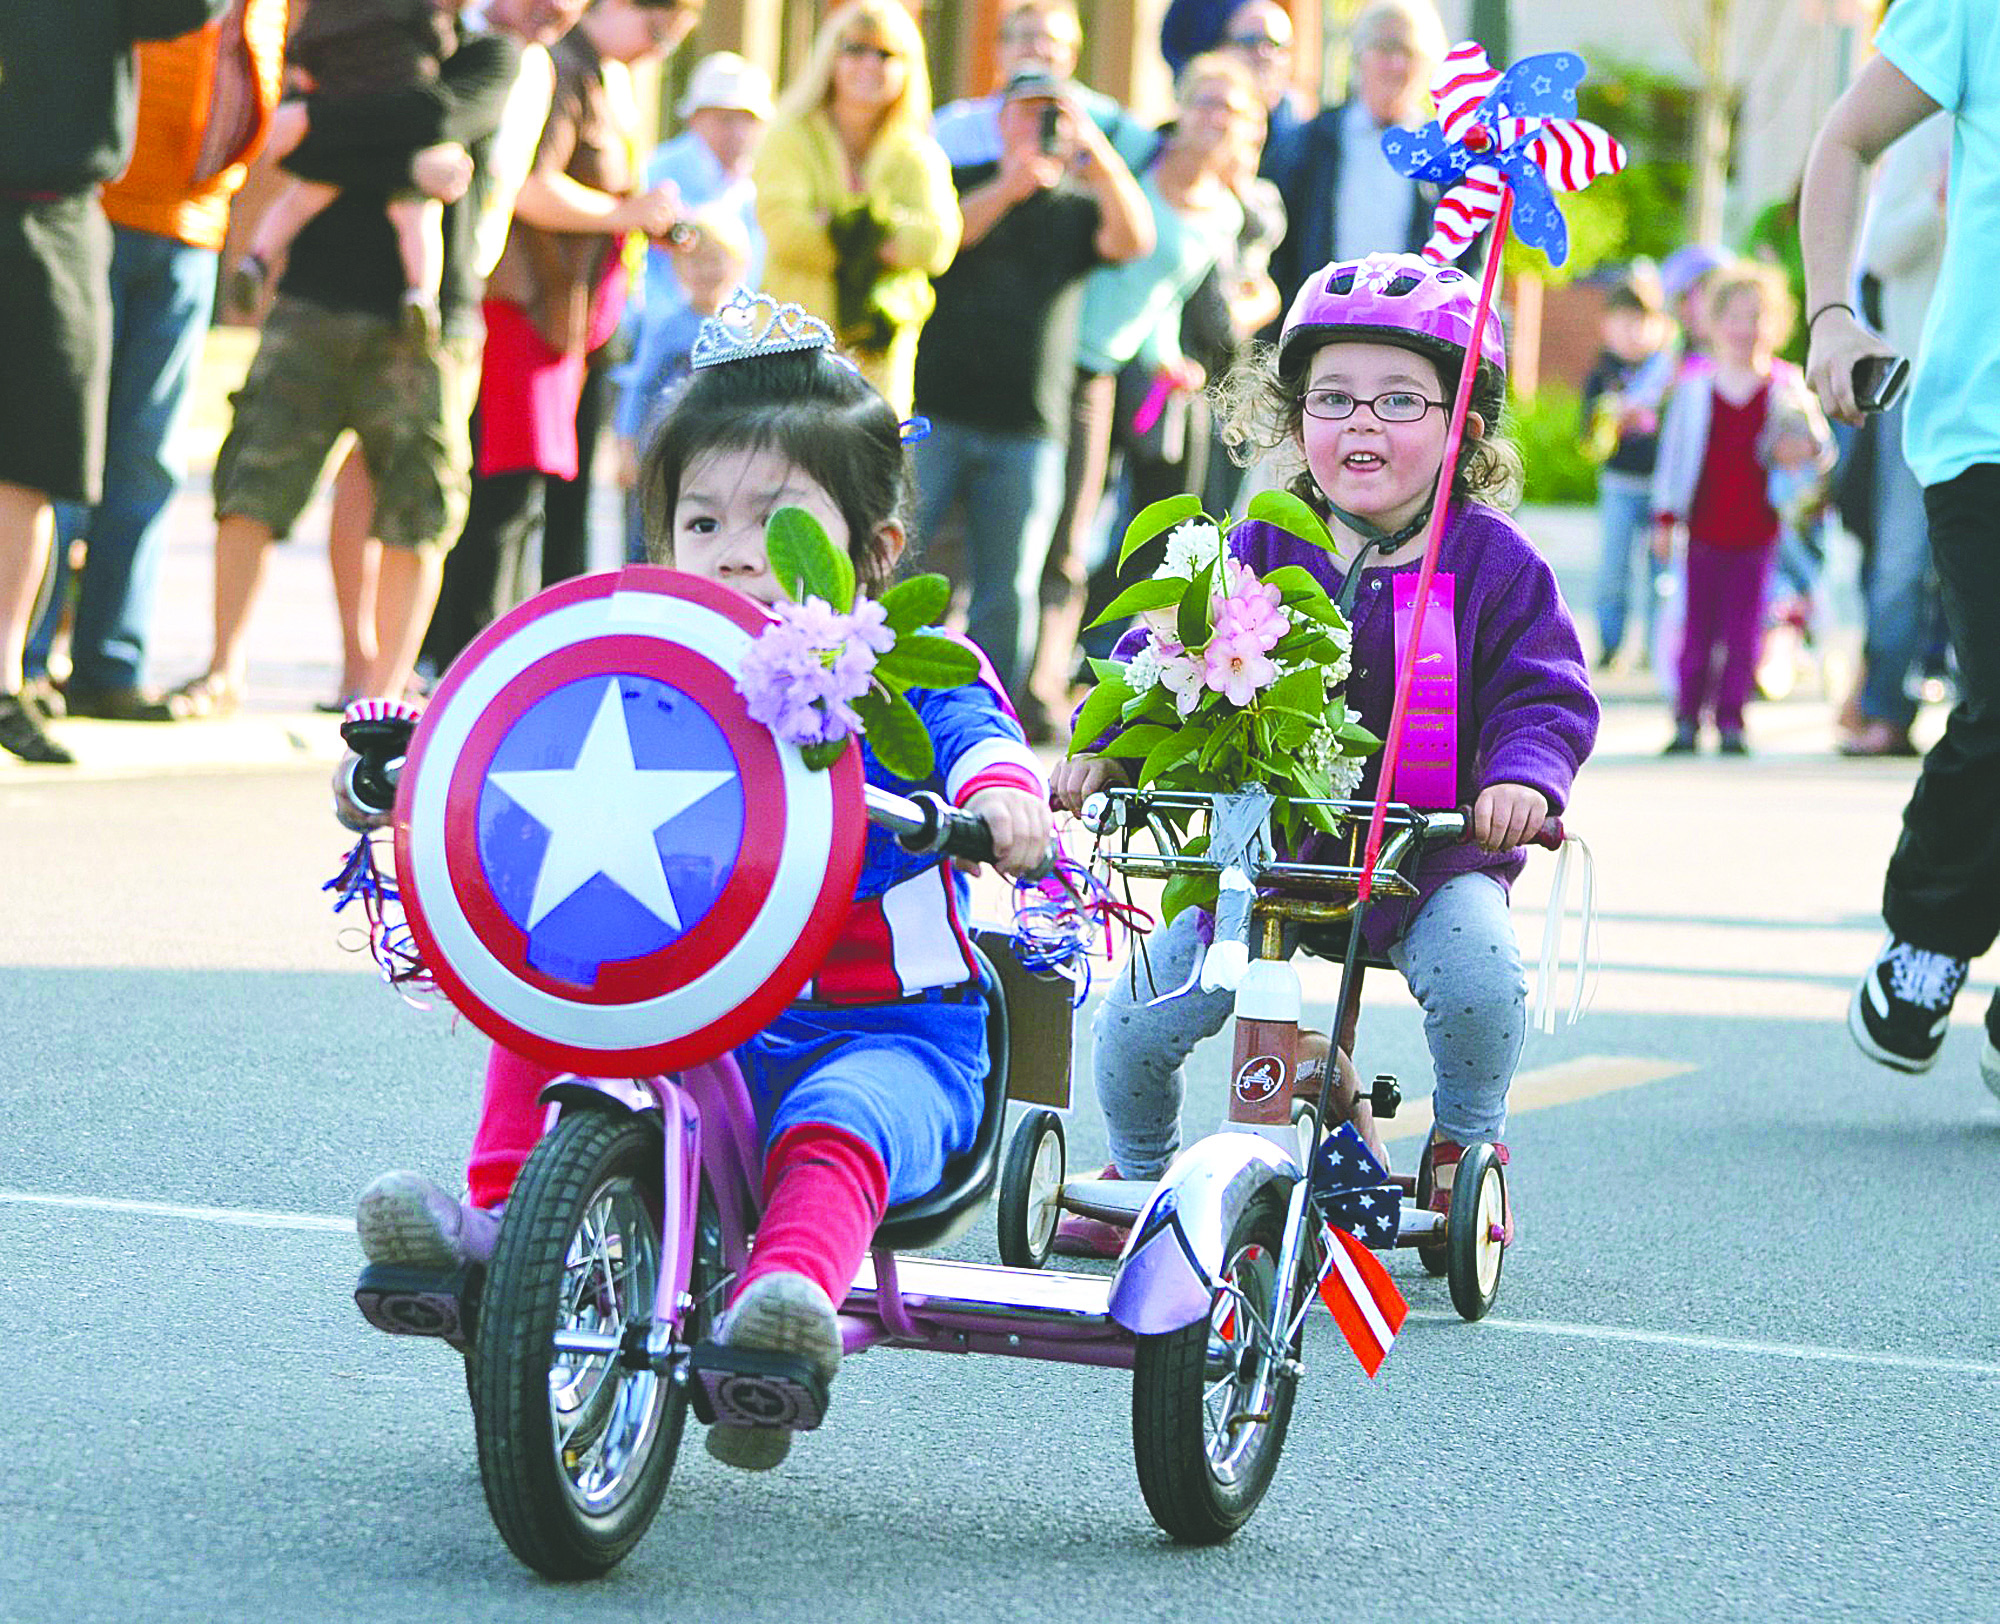 Livia Lee pulls ahead of Silja Sebastian in the 3-year-old segment of the 77th annual Rhododendron Festival's Trike Race on Water Street in Port Townsend on Wednesday. Charlie Bermant/Peninsula Daily News